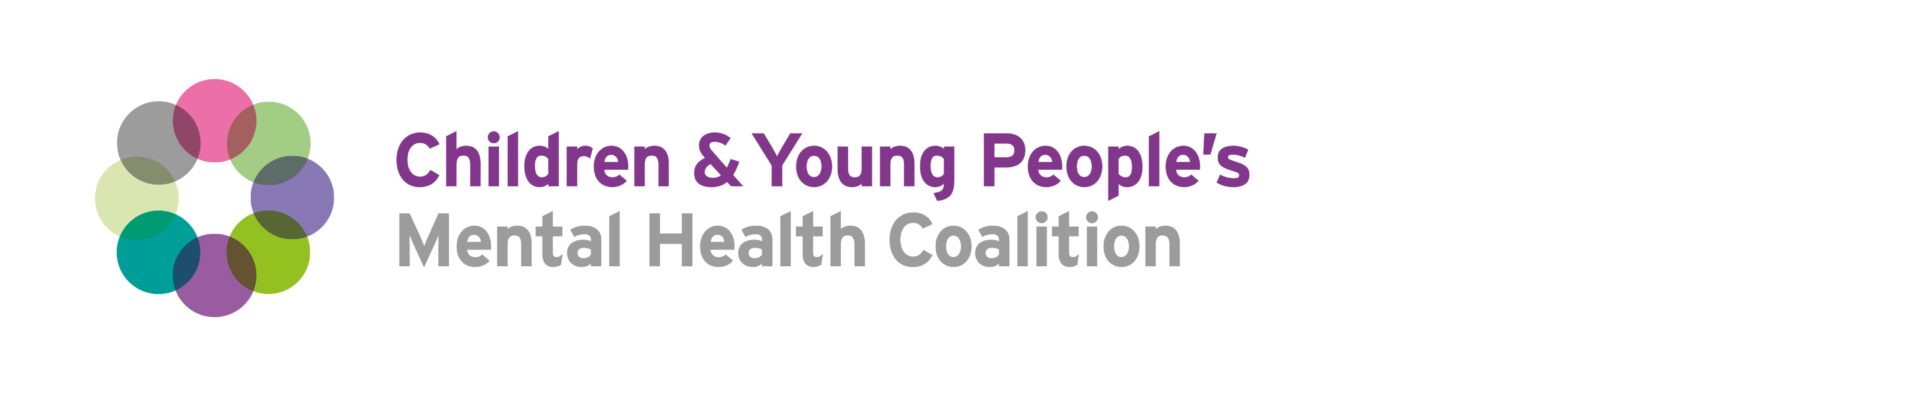 Children & Young People's Mental Health Coalition